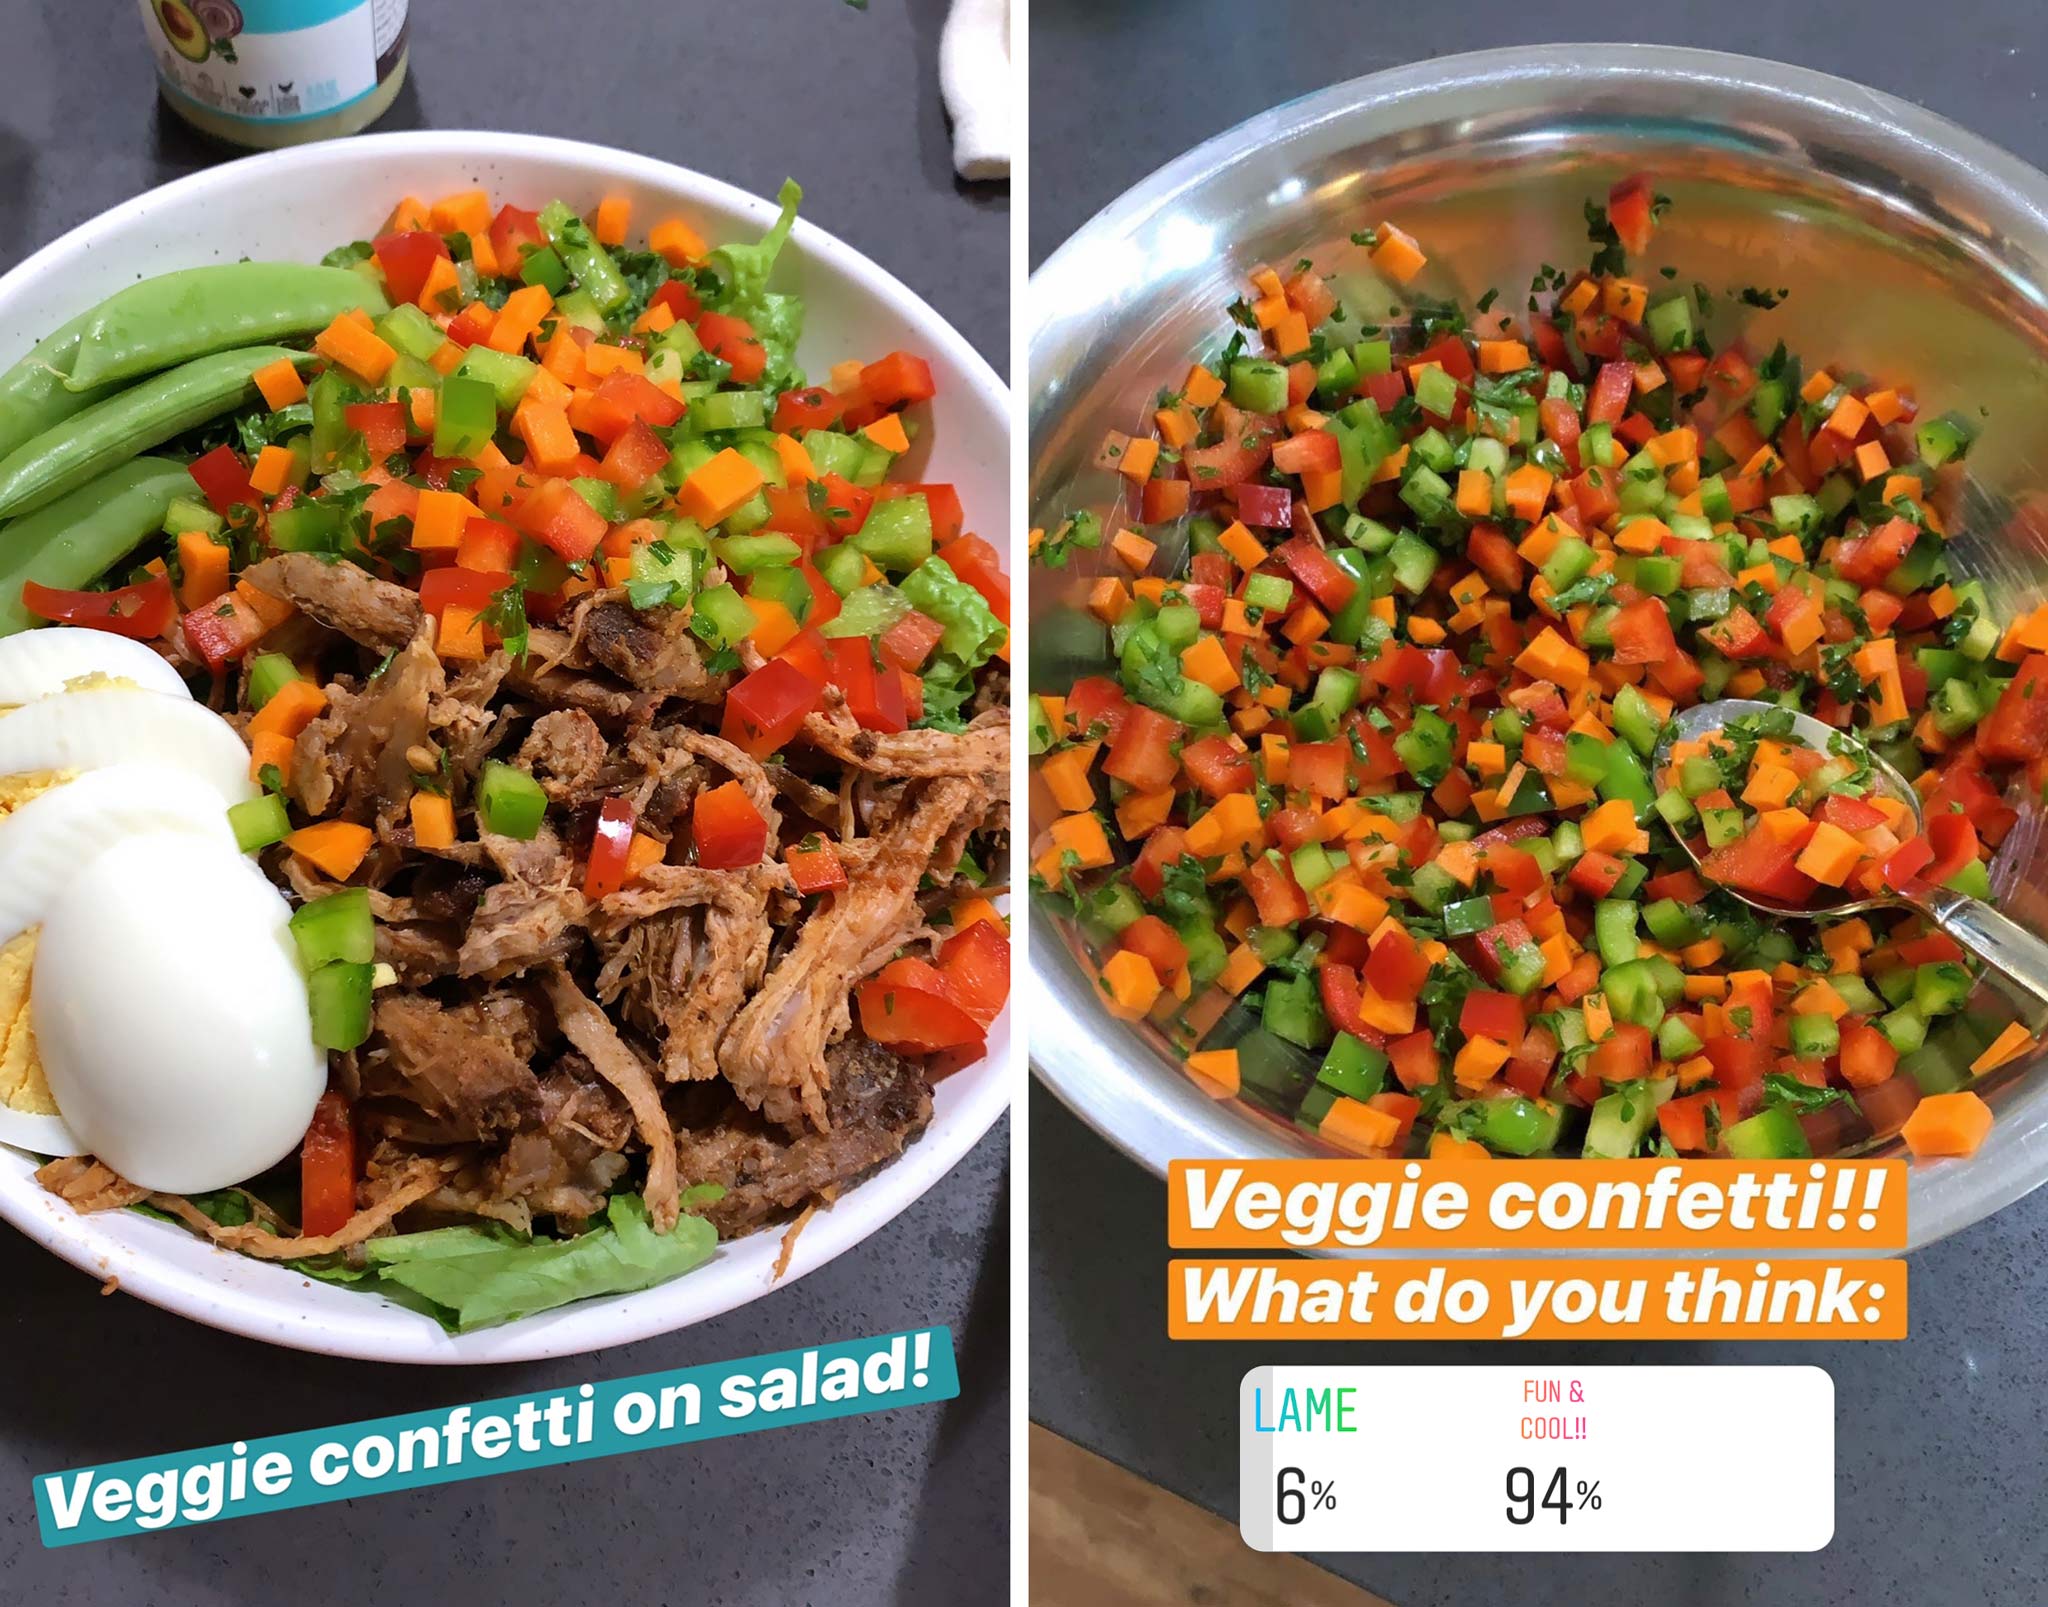 pictures from instagram about the vegetable confetti